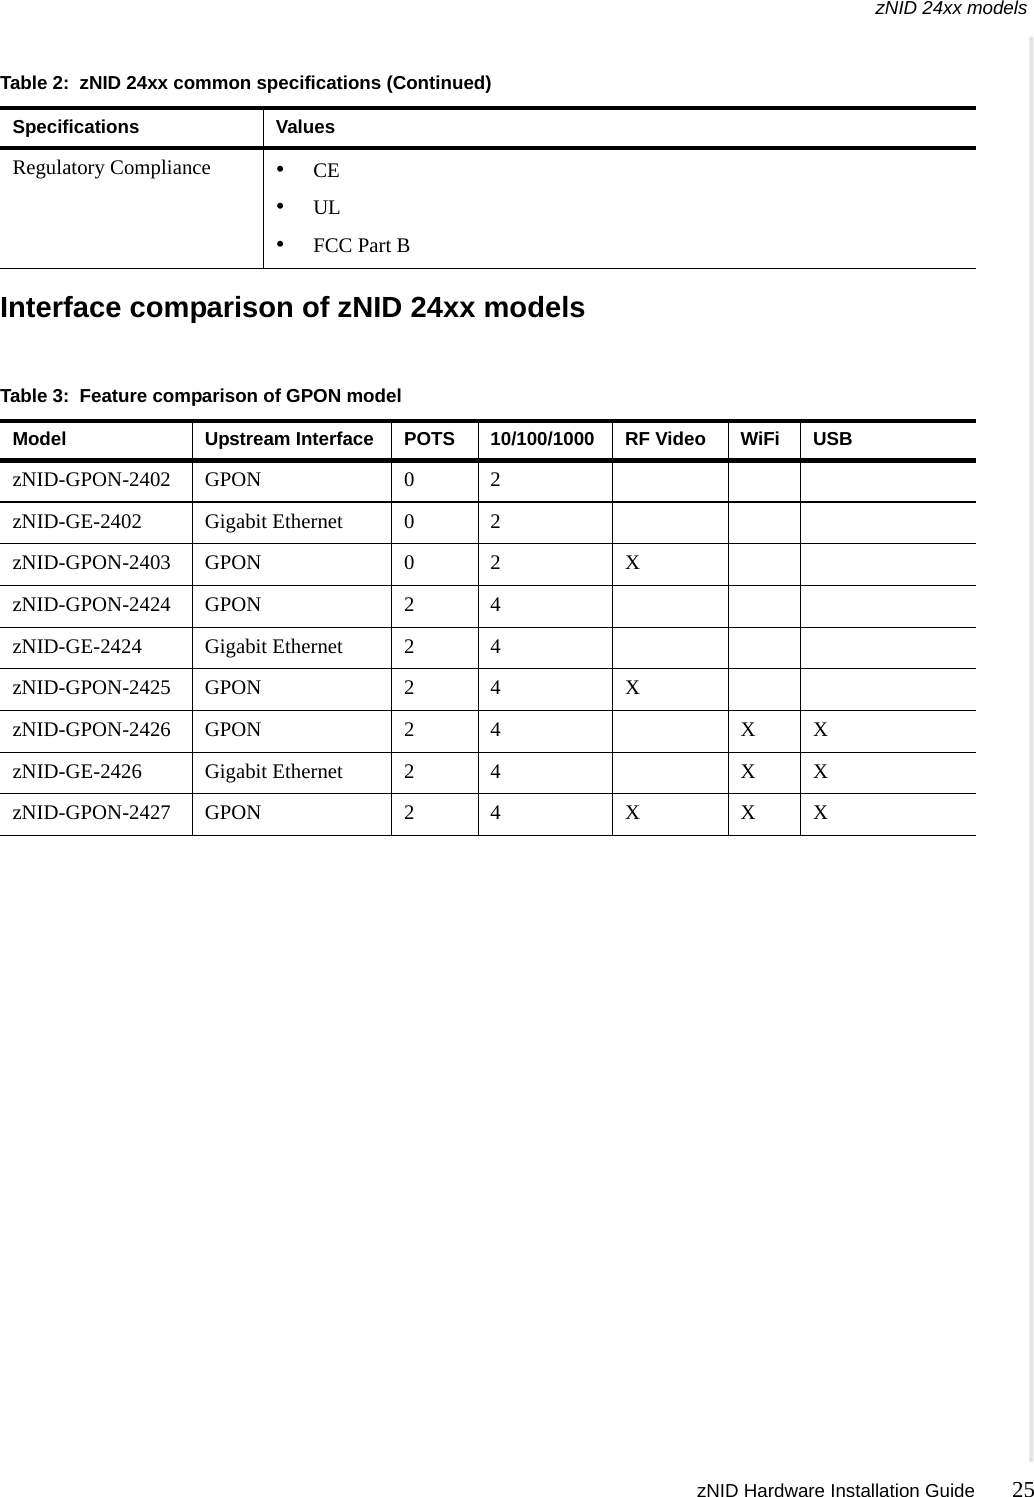 zNID 24xx models zNID Hardware Installation Guide 25   Interface comparison of zNID 24xx modelsRegulatory Compliance  •CE•UL•FCC Part BTable 2:  zNID 24xx common specifications (Continued)Specifications ValuesTable 3:  Feature comparison of GPON modelModel Upstream Interface POTS 10/100/1000 RF Video WiFi USBzNID-GPON-2402 GPON 0 2zNID-GE-2402 Gigabit Ethernet 0 2zNID-GPON-2403 GPON 0 2 XzNID-GPON-2424 GPON 2 4zNID-GE-2424 Gigabit Ethernet 2 4zNID-GPON-2425 GPON 2 4 XzNID-GPON-2426 GPON 2 4 X XzNID-GE-2426 Gigabit Ethernet 2 4 X XzNID-GPON-2427 GPON 2 4 X X X